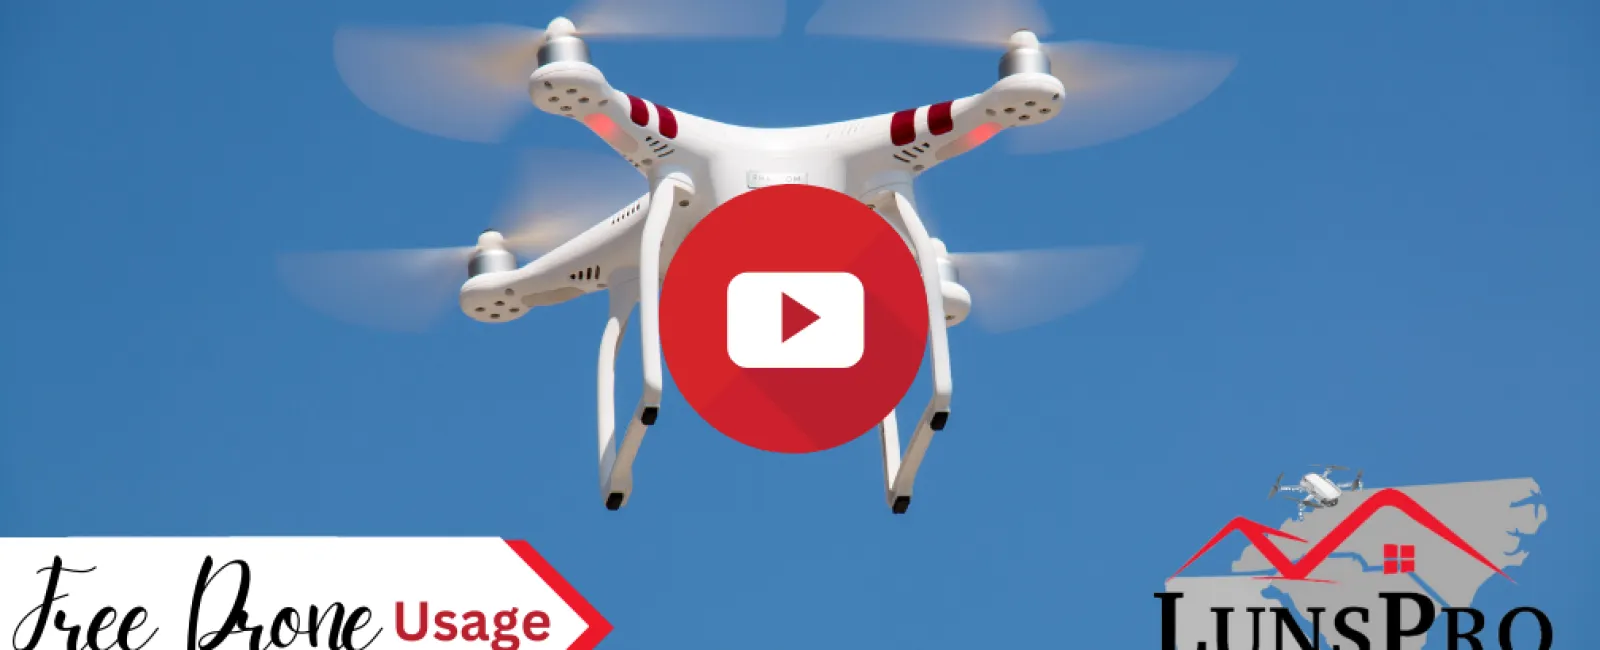 Free Drone Usage with every home inspection!